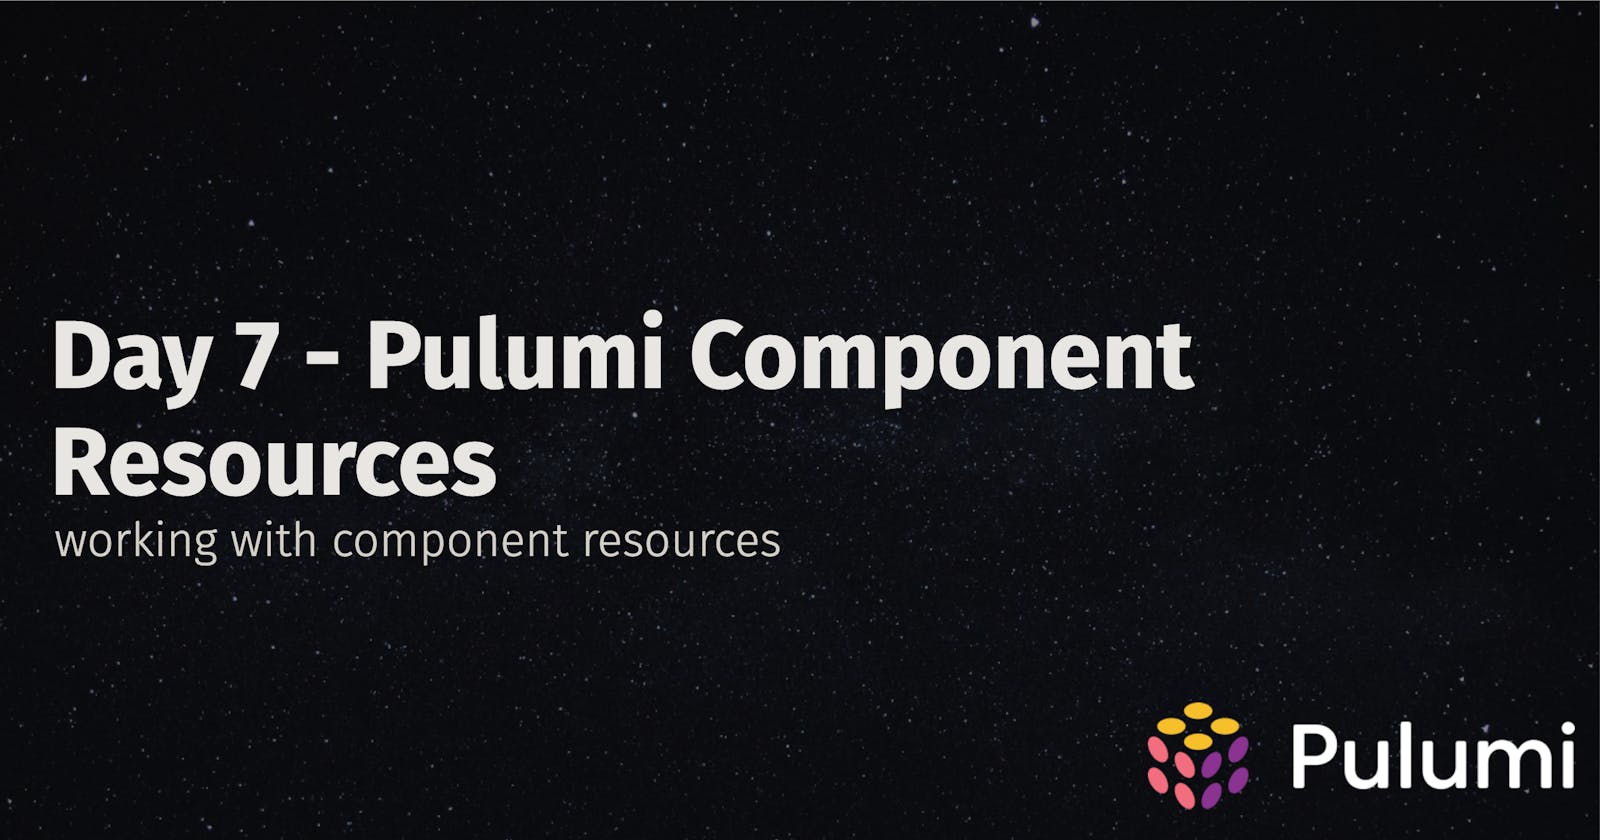 Day 7 - Pulumi Component Resources.